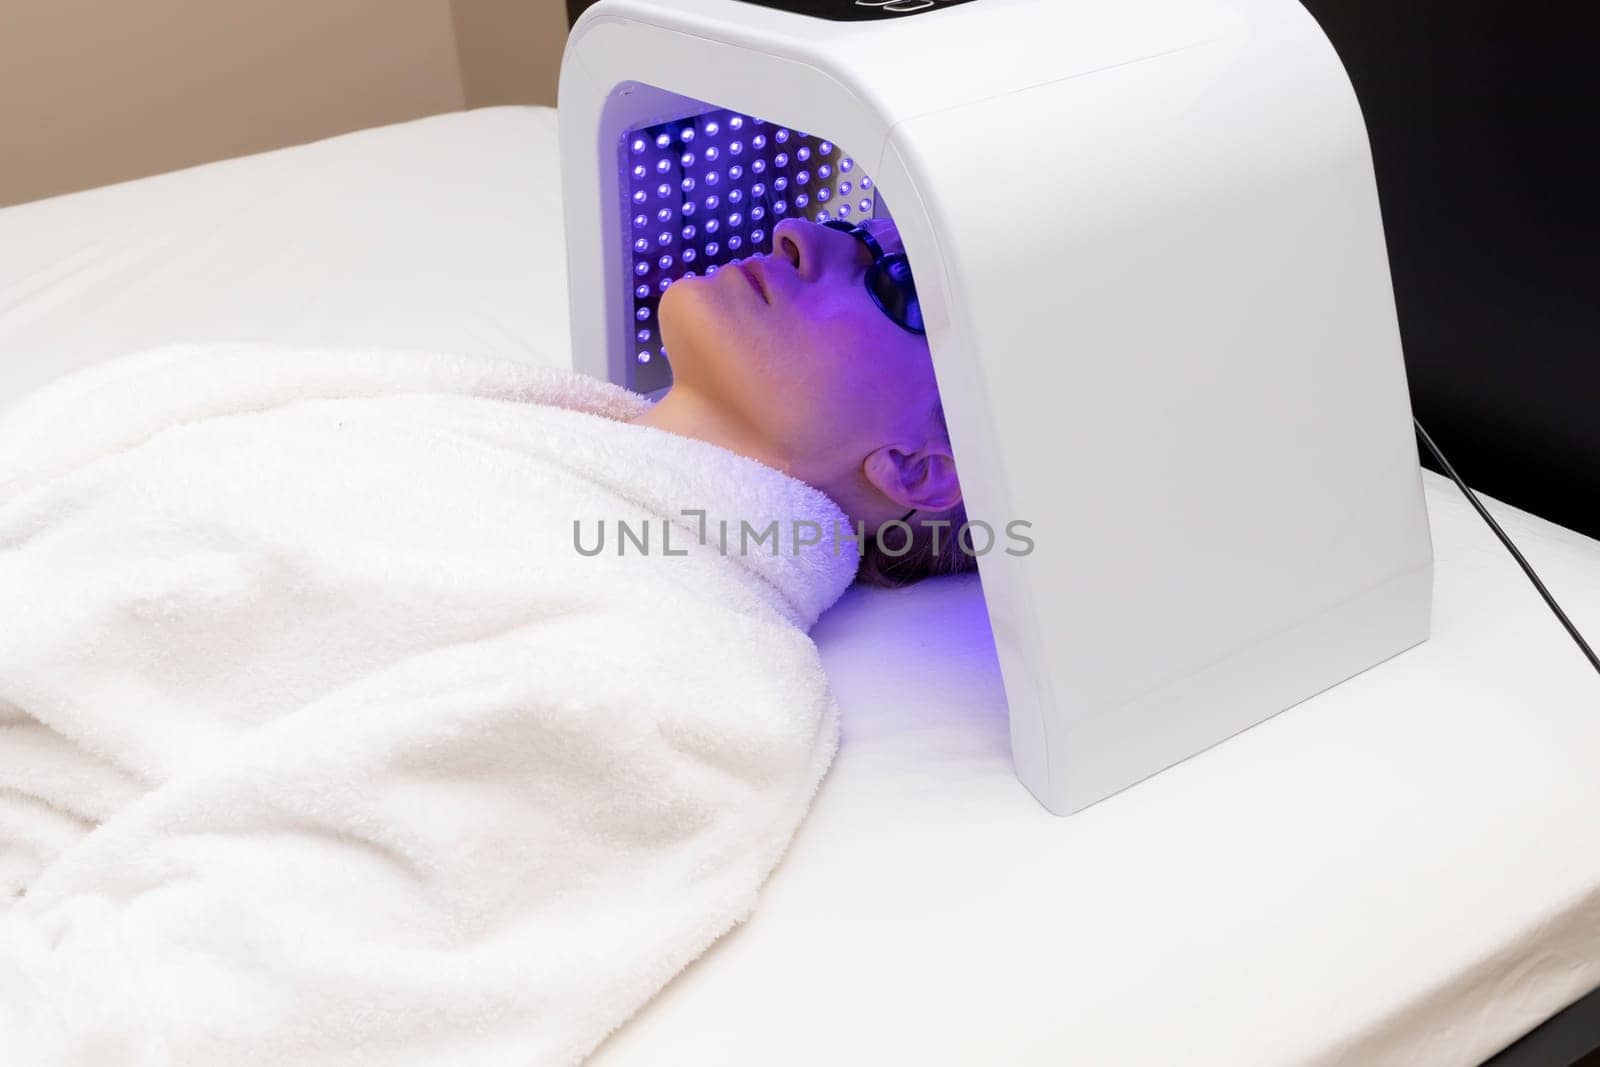 Home Skin Care Procedure. Cosmetic Led Light Face Mask. Woman In Her 30s Lying Under Facial Regenerative Treatment Mask On Bed In Bedroom. Acne, Spot Cure. Beauty Photon Therapy. Horizontal Plane.